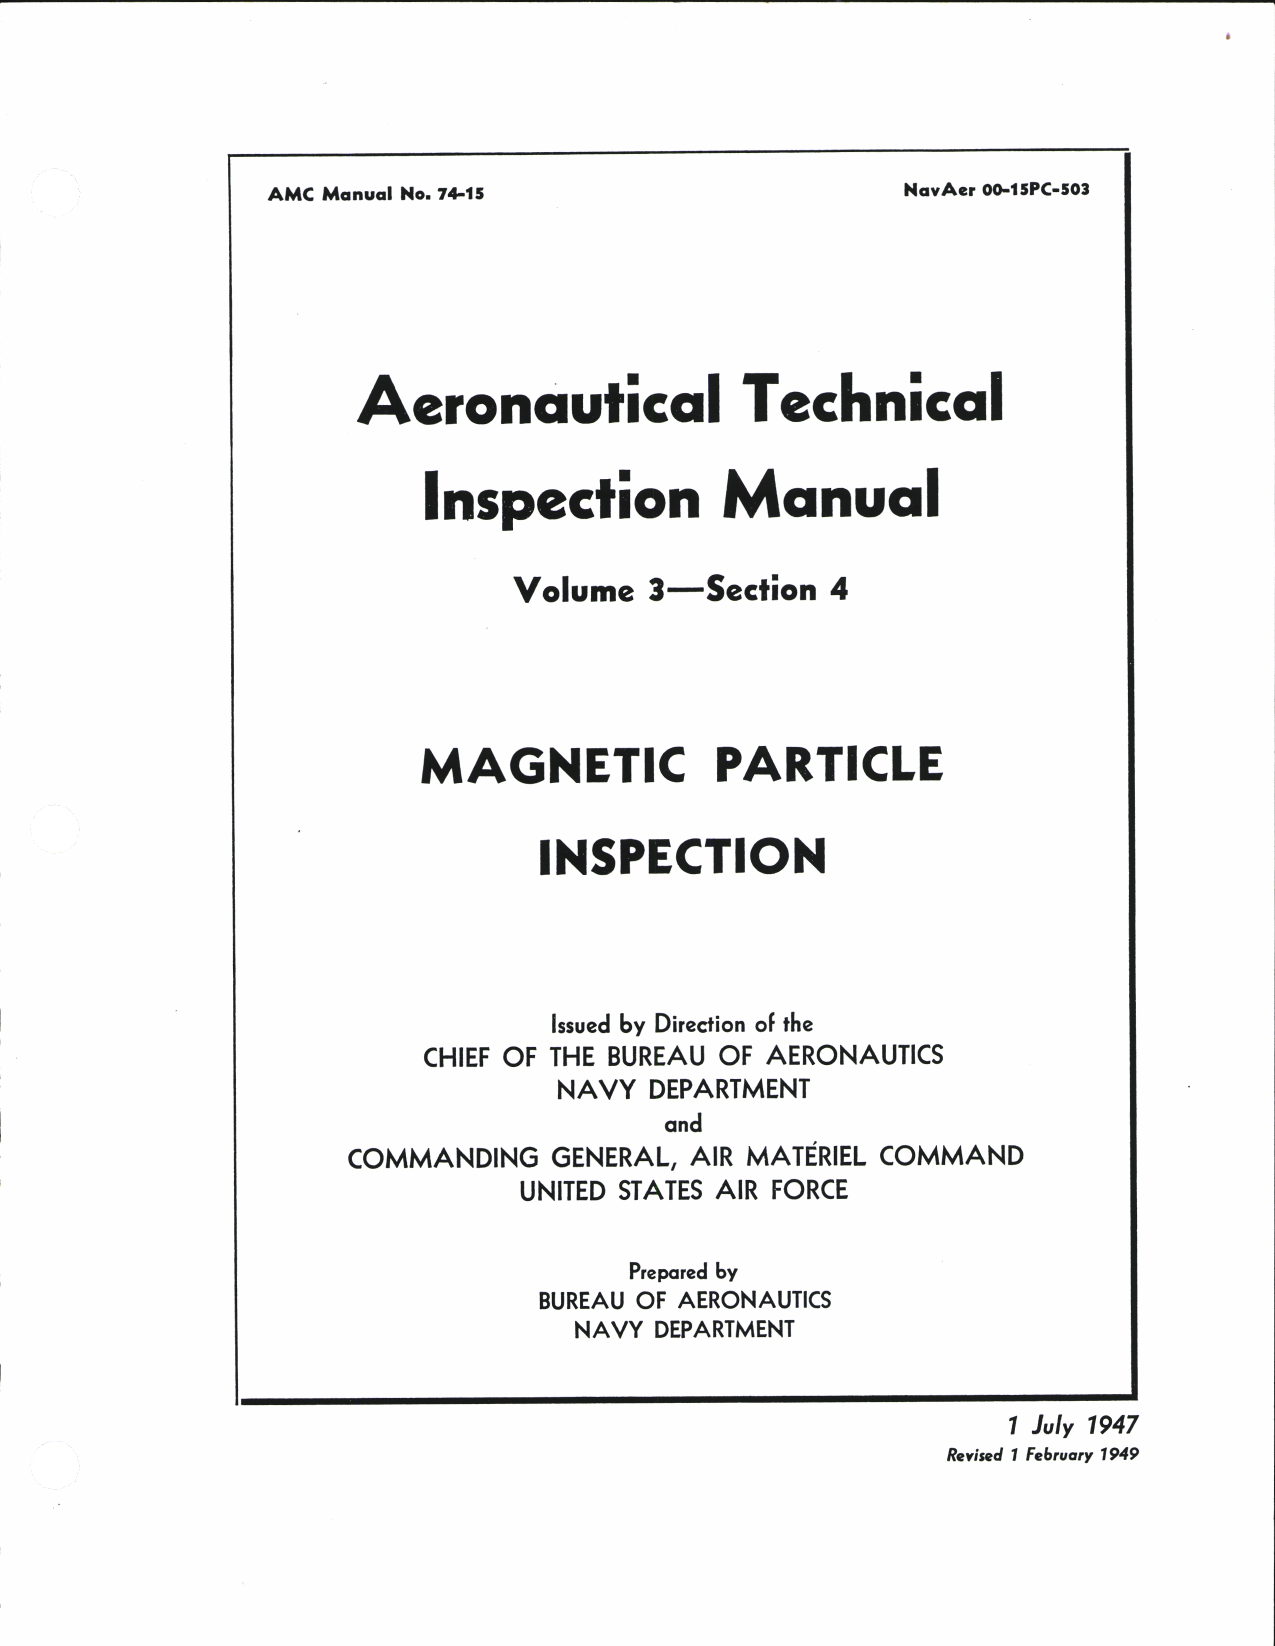 Sample page 1 from AirCorps Library document: Aeronautical Technical Inspection Manual - Magnetic Particle Inspection